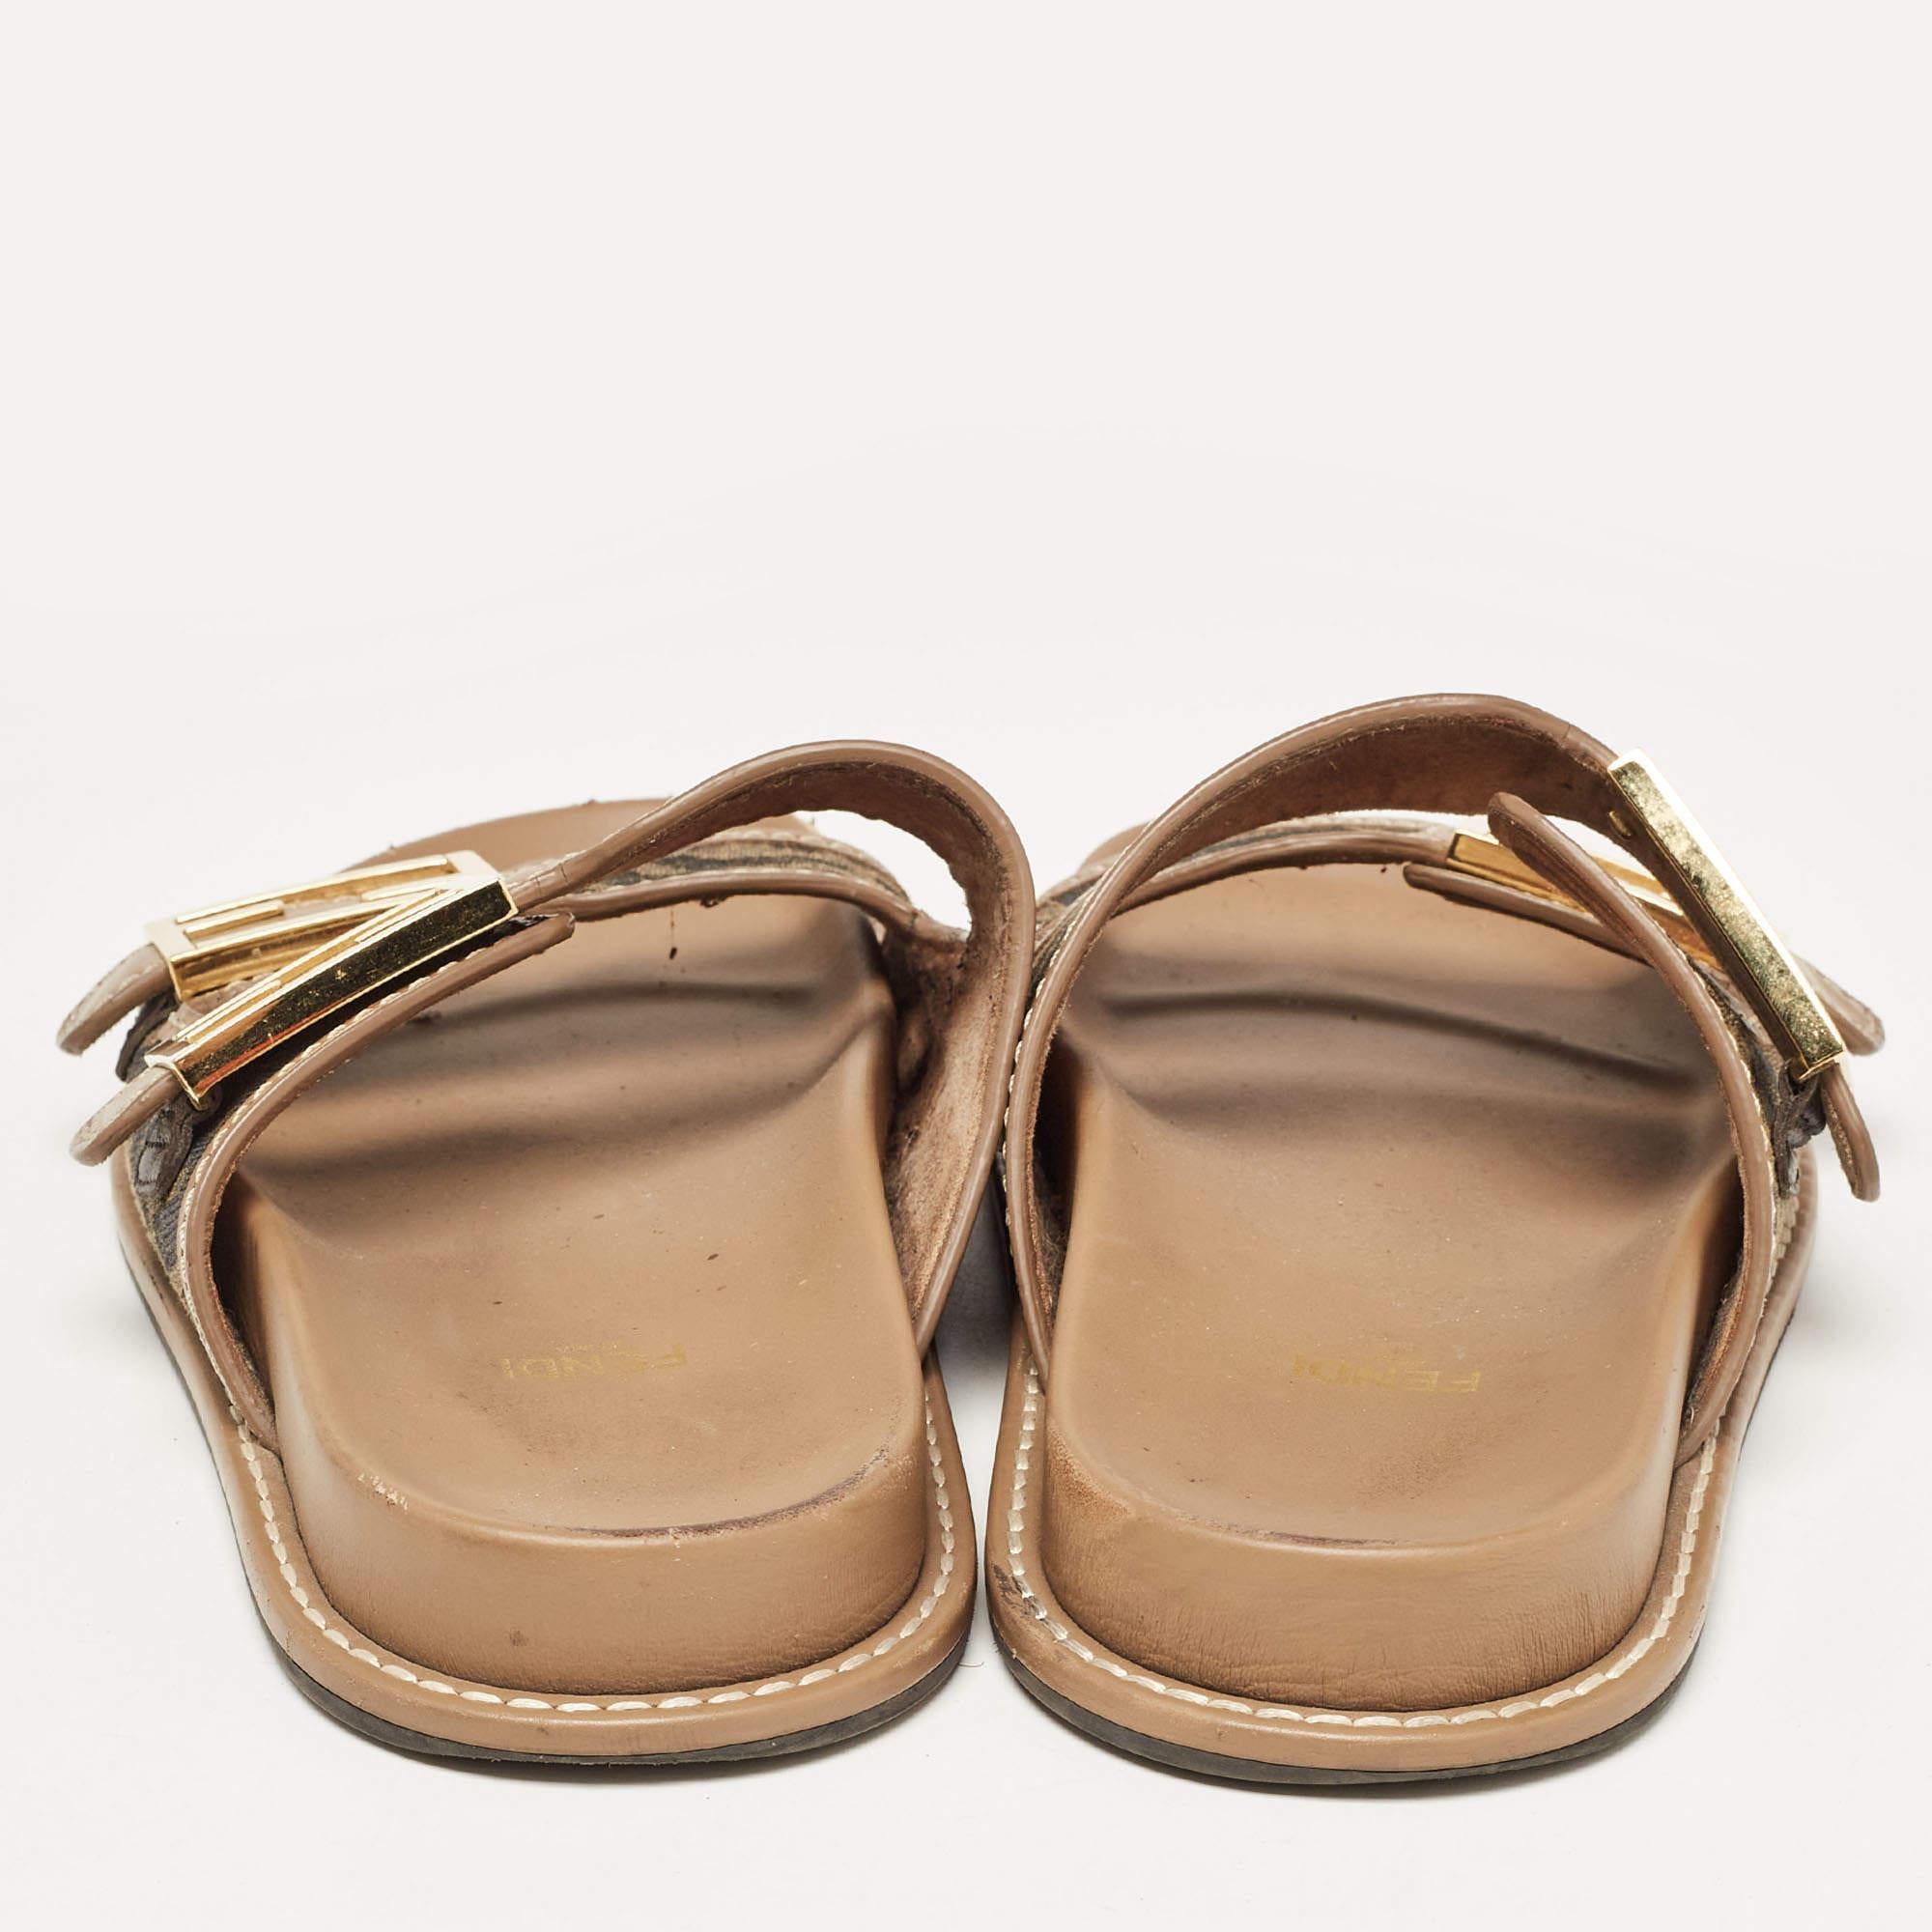 A perfect blend of luxury, style, and comfort, these designer flats are made using quality materials and frame your feet in the most refined way. They can be paired with a host of outfits from your wardrobe.

